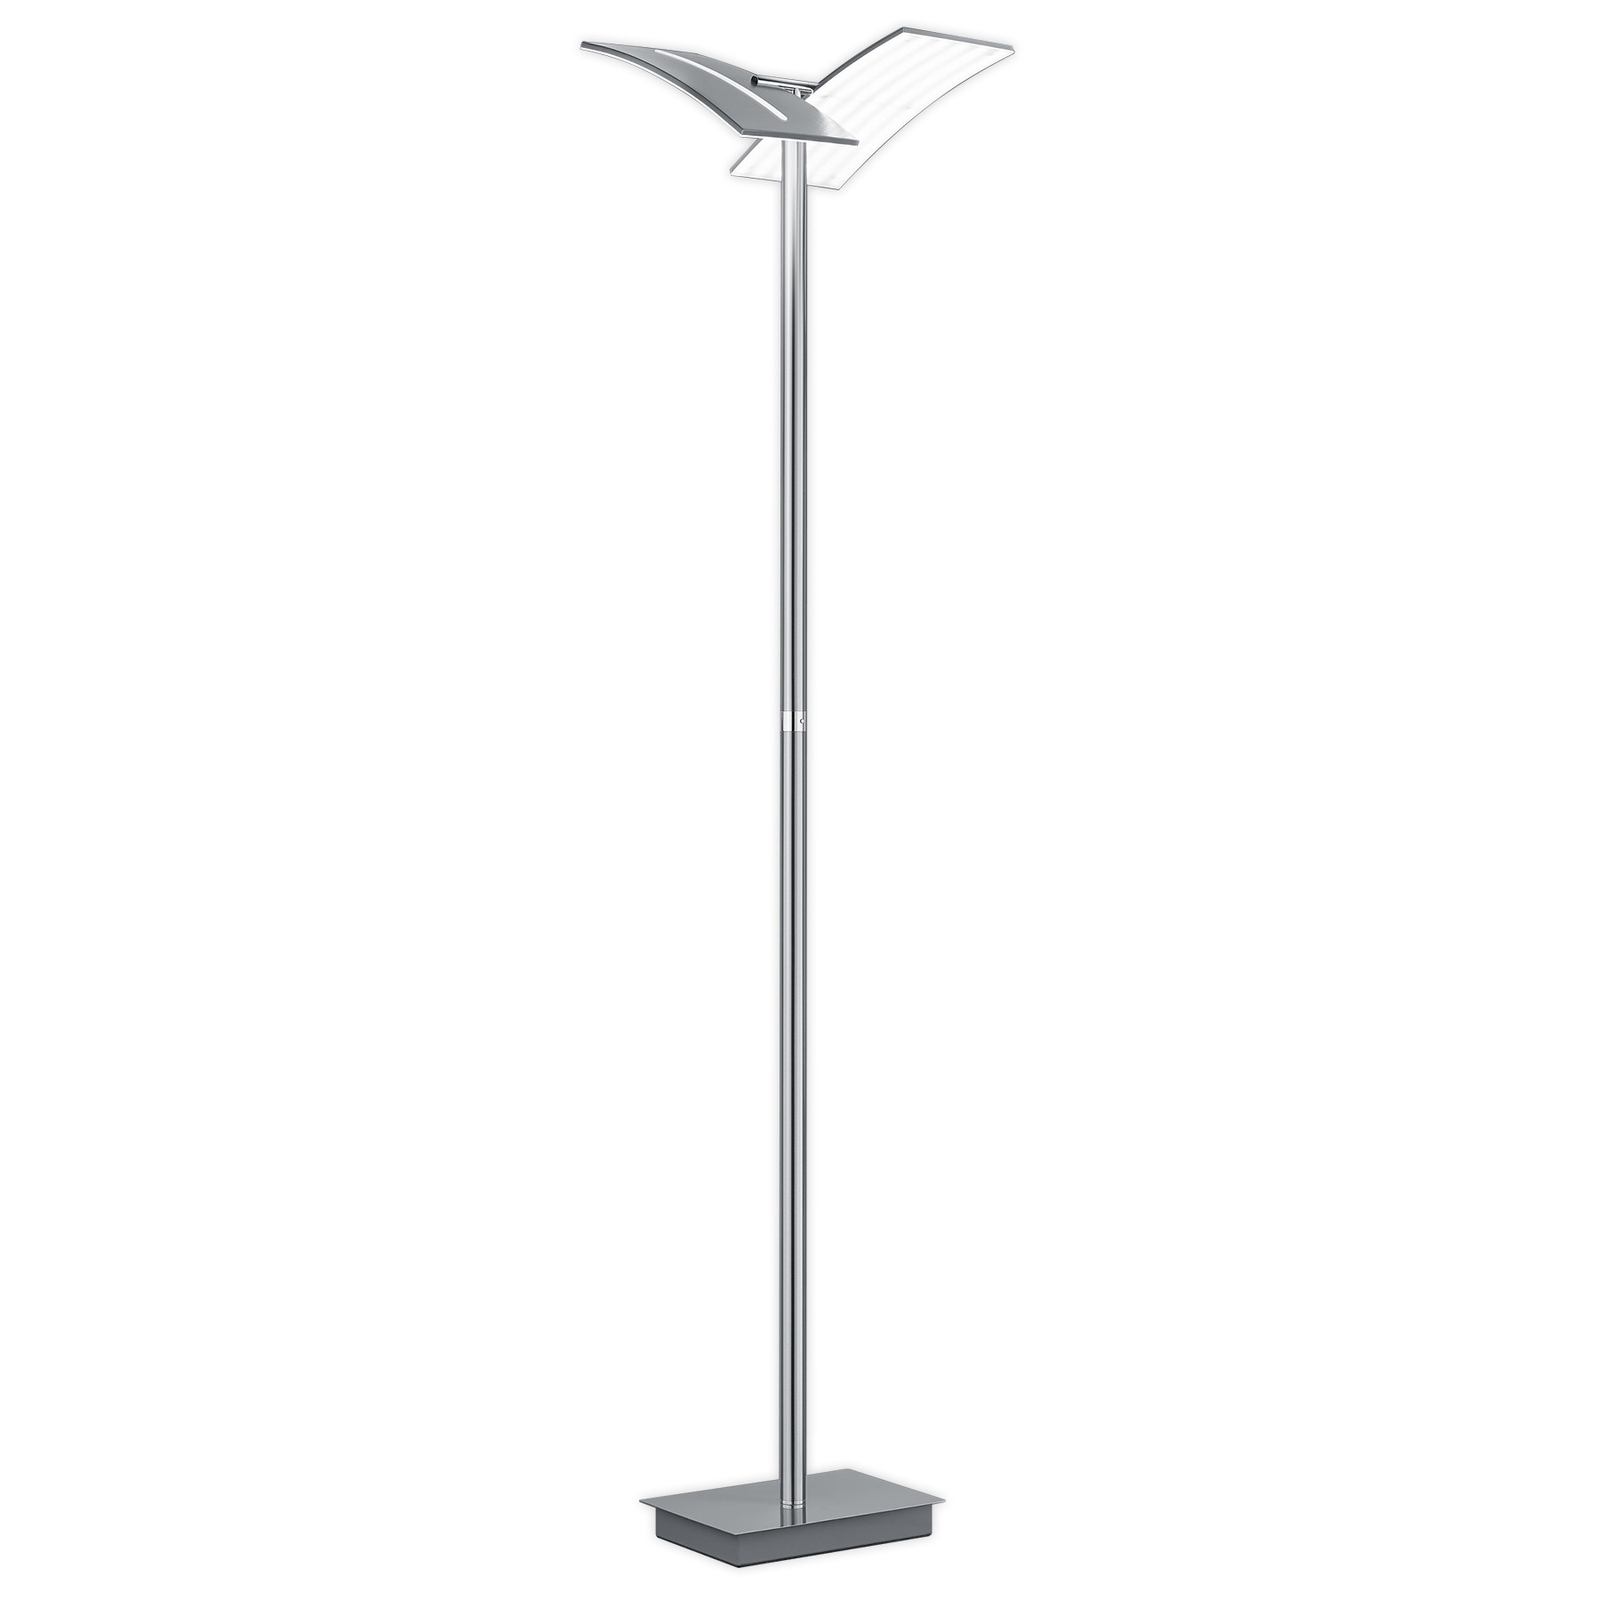 LED floor lamp Dual CCT, dimmable, nickel